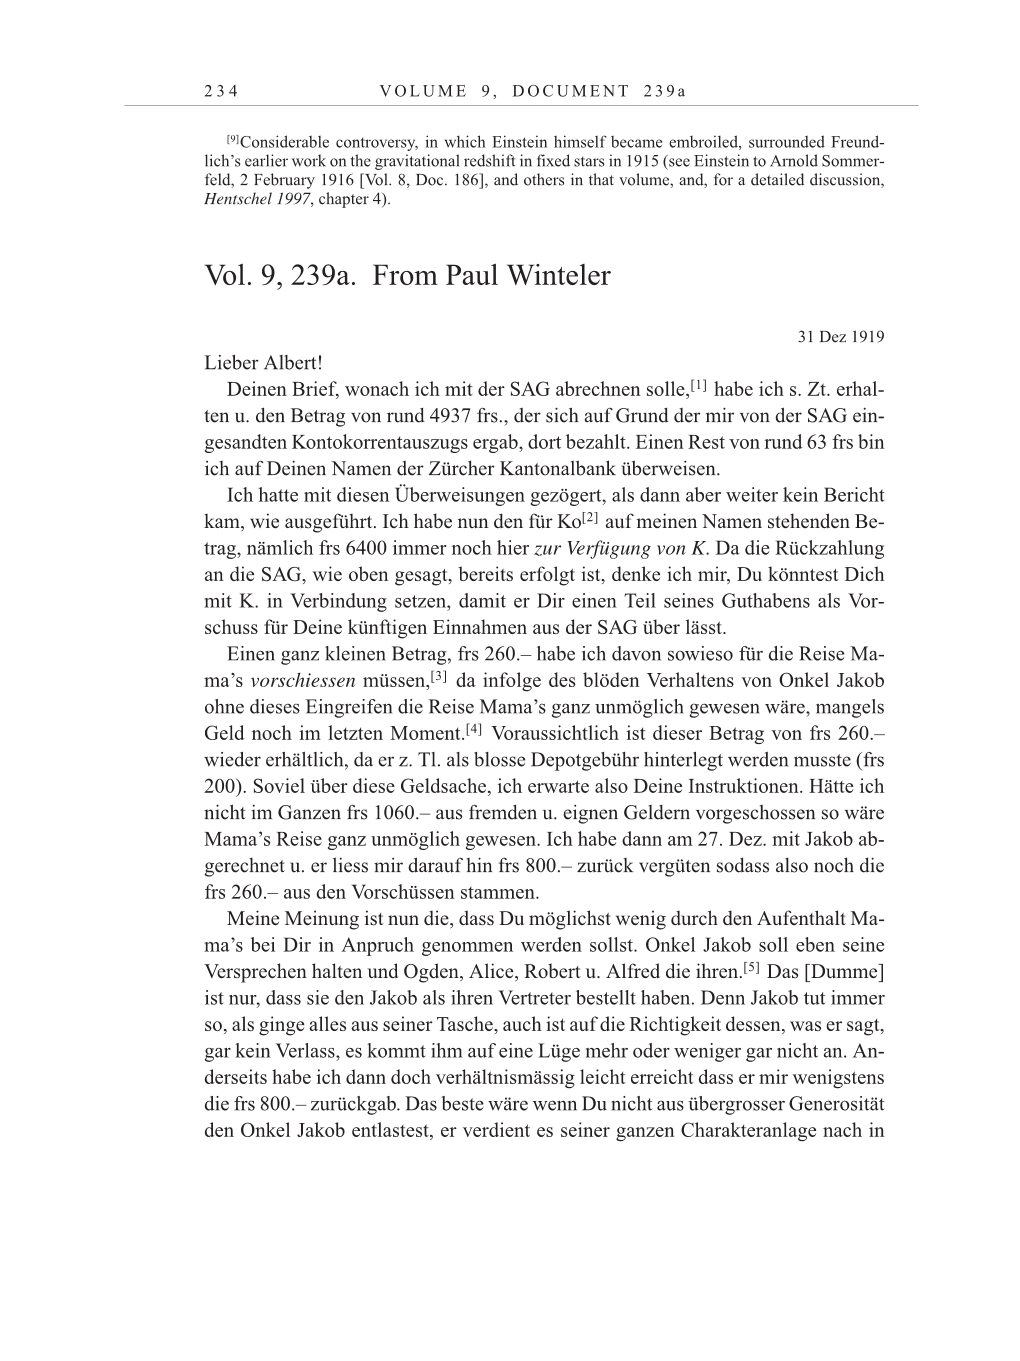 Volume 10: The Berlin Years: Correspondence May-December 1920 / Supplementary Correspondence 1909-1920 page 234